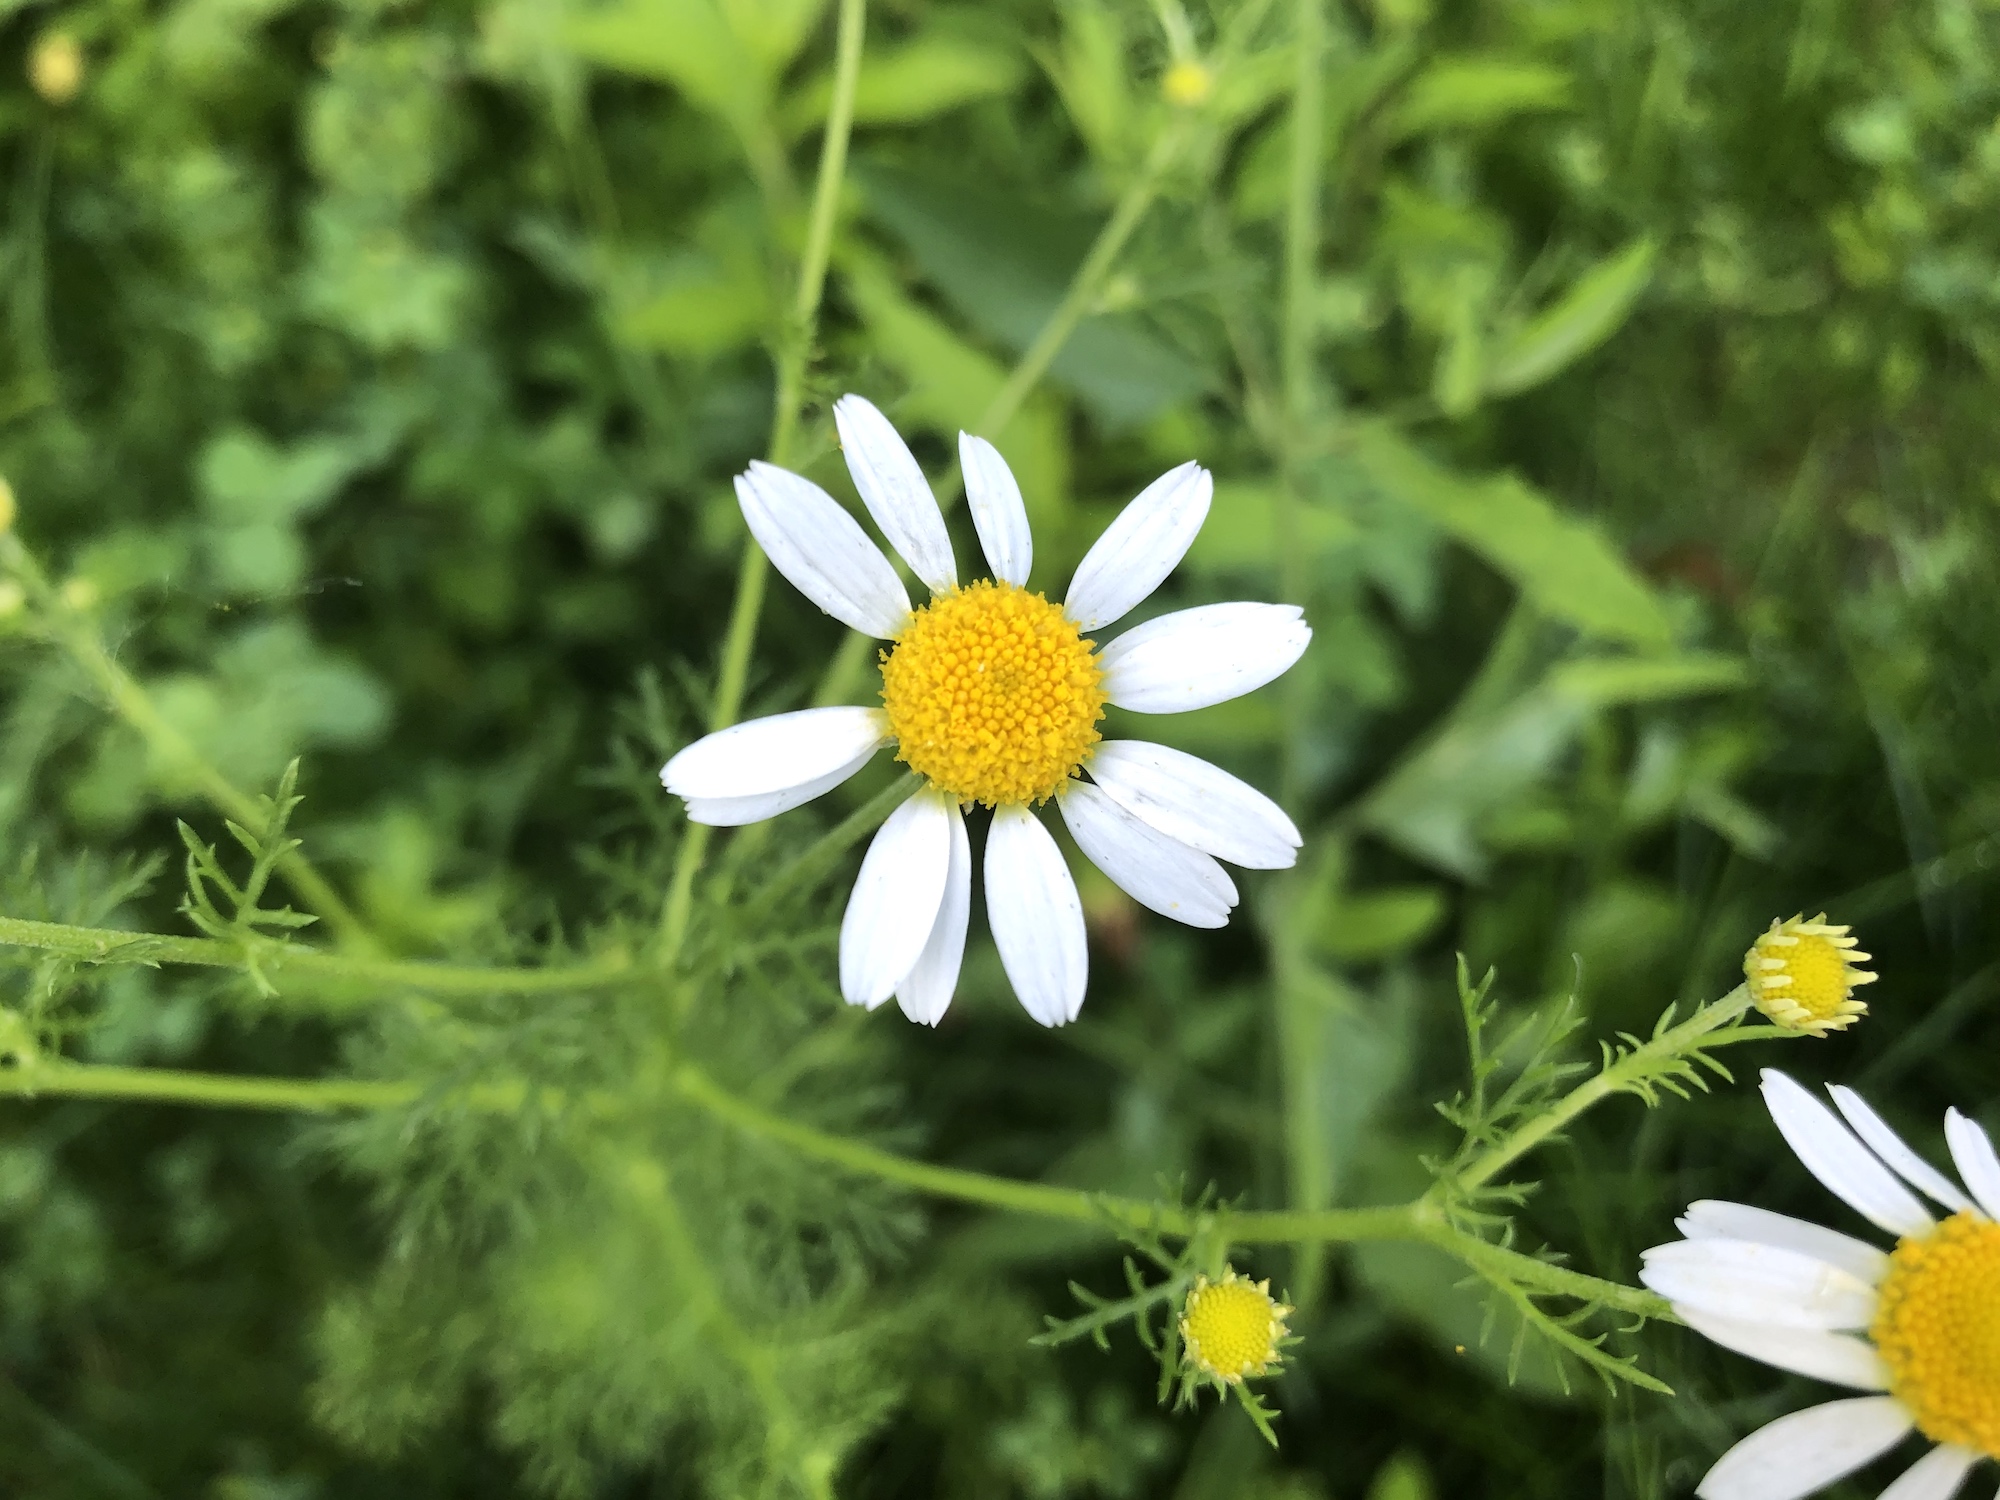 Chamomile in grass between Monroe Street sidewalk and Marion Dunn woods in Madison, Wisconsin on June 29, 2019.